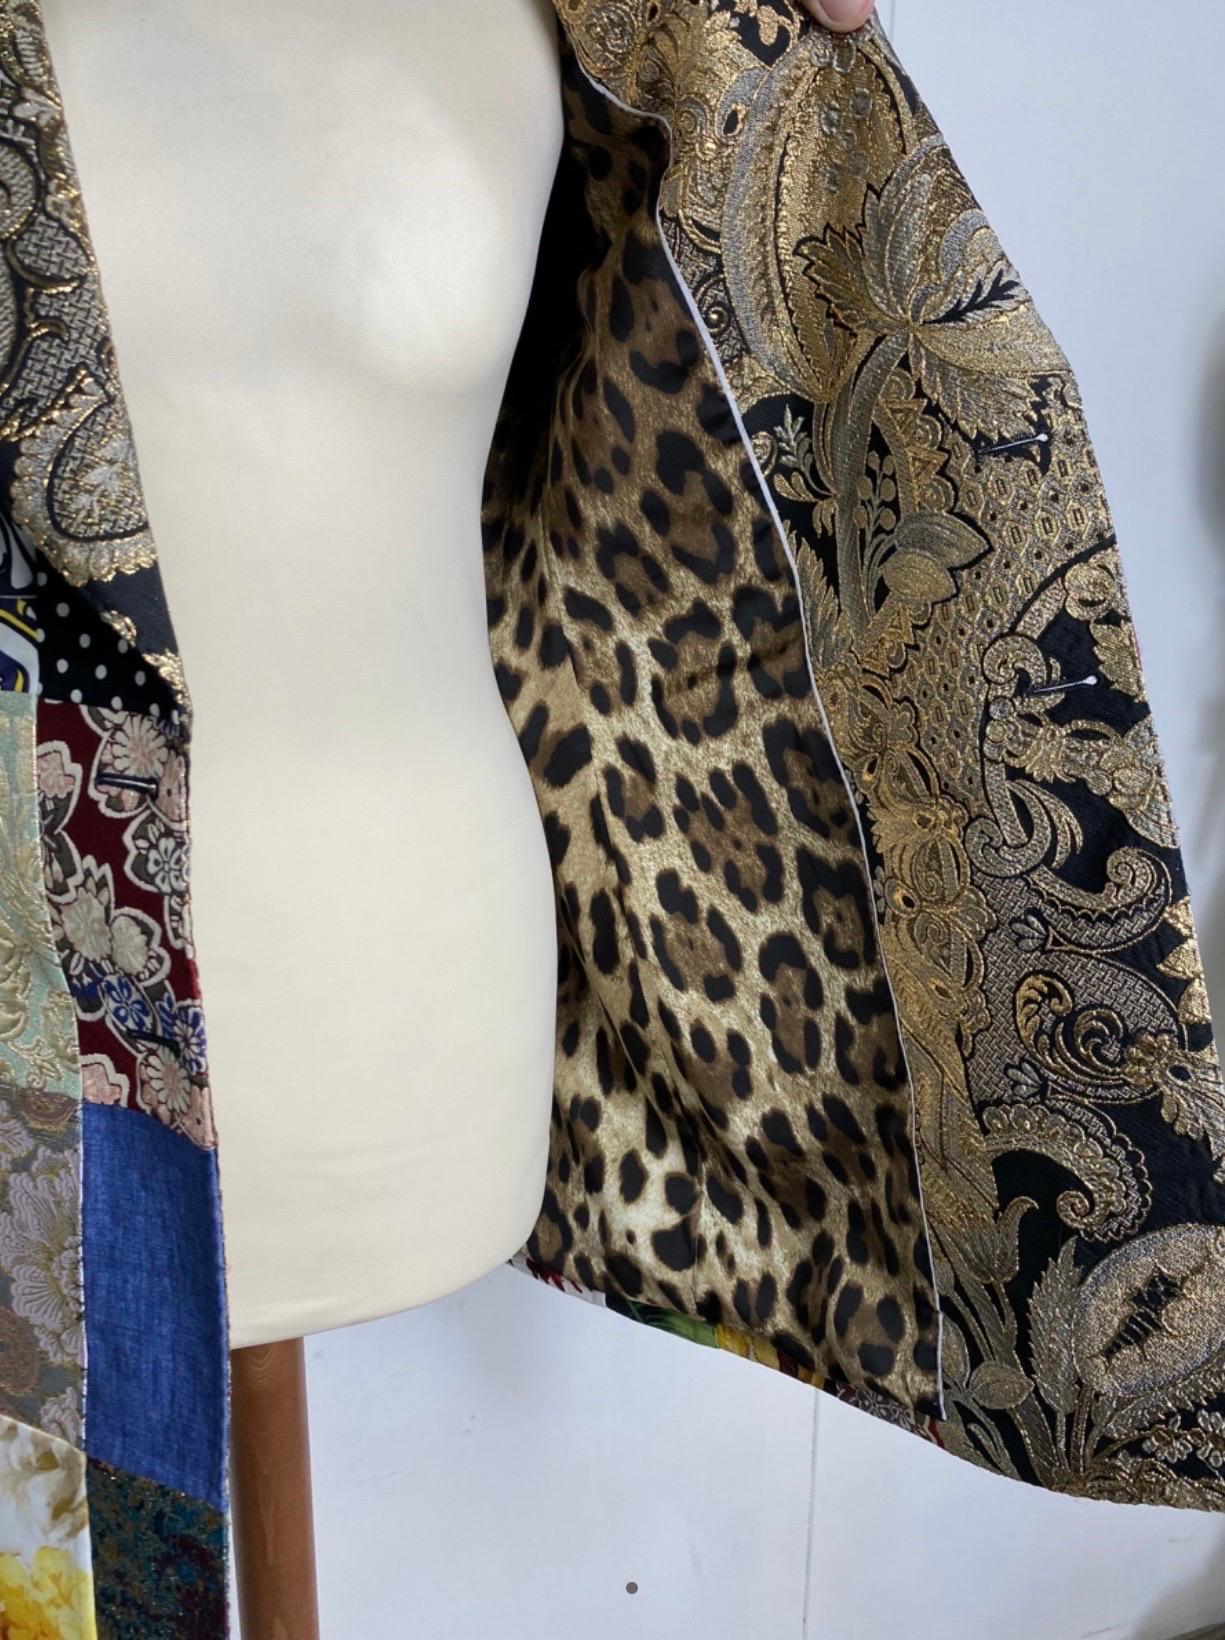 Dolce & Gabbana spring 2021 patchwork Blazer In Excellent Condition For Sale In Carnate, IT